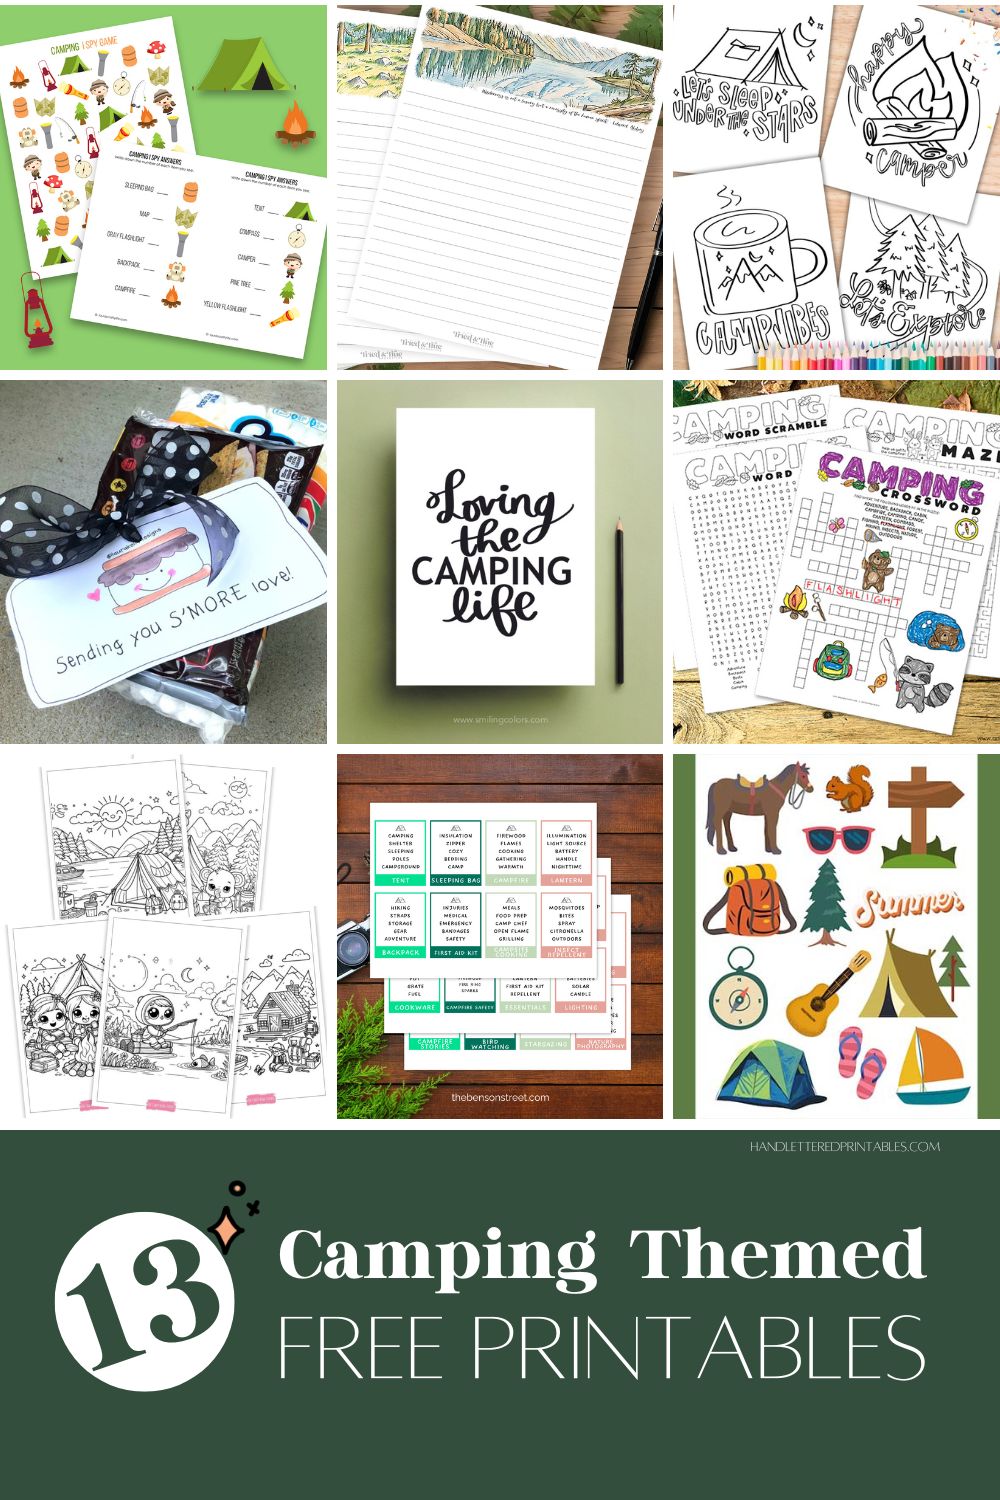 collage of camping themed printables, text over reads: 13 camping themed free printables